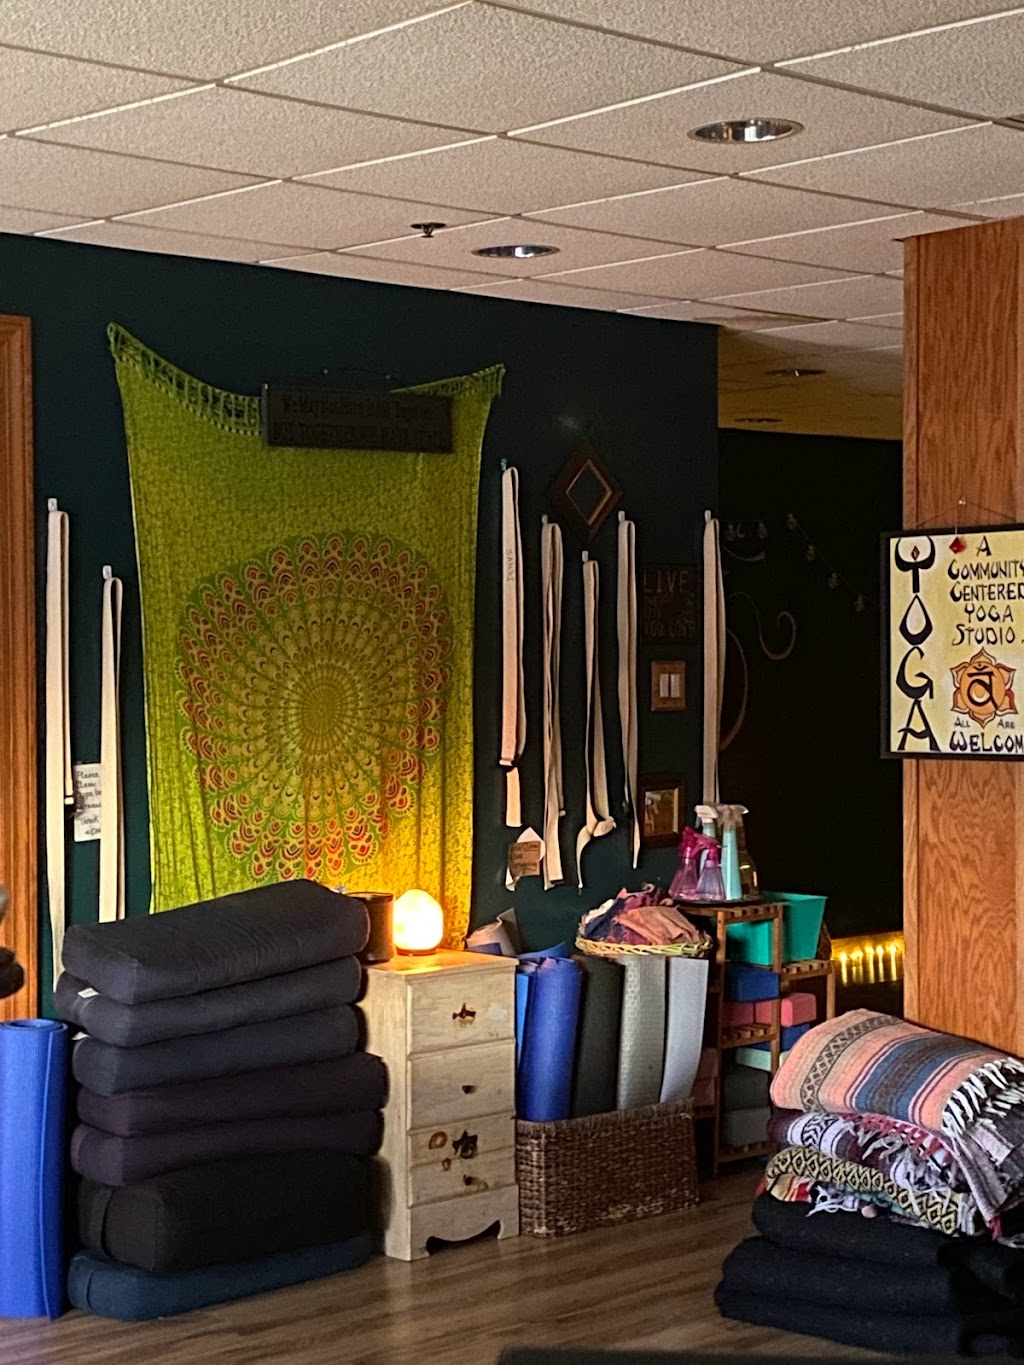 Open Center Yoga & The Crafted Arts Boutique | 102 Wood St, Bristol, PA 19007 | Phone: (267) 980-5833